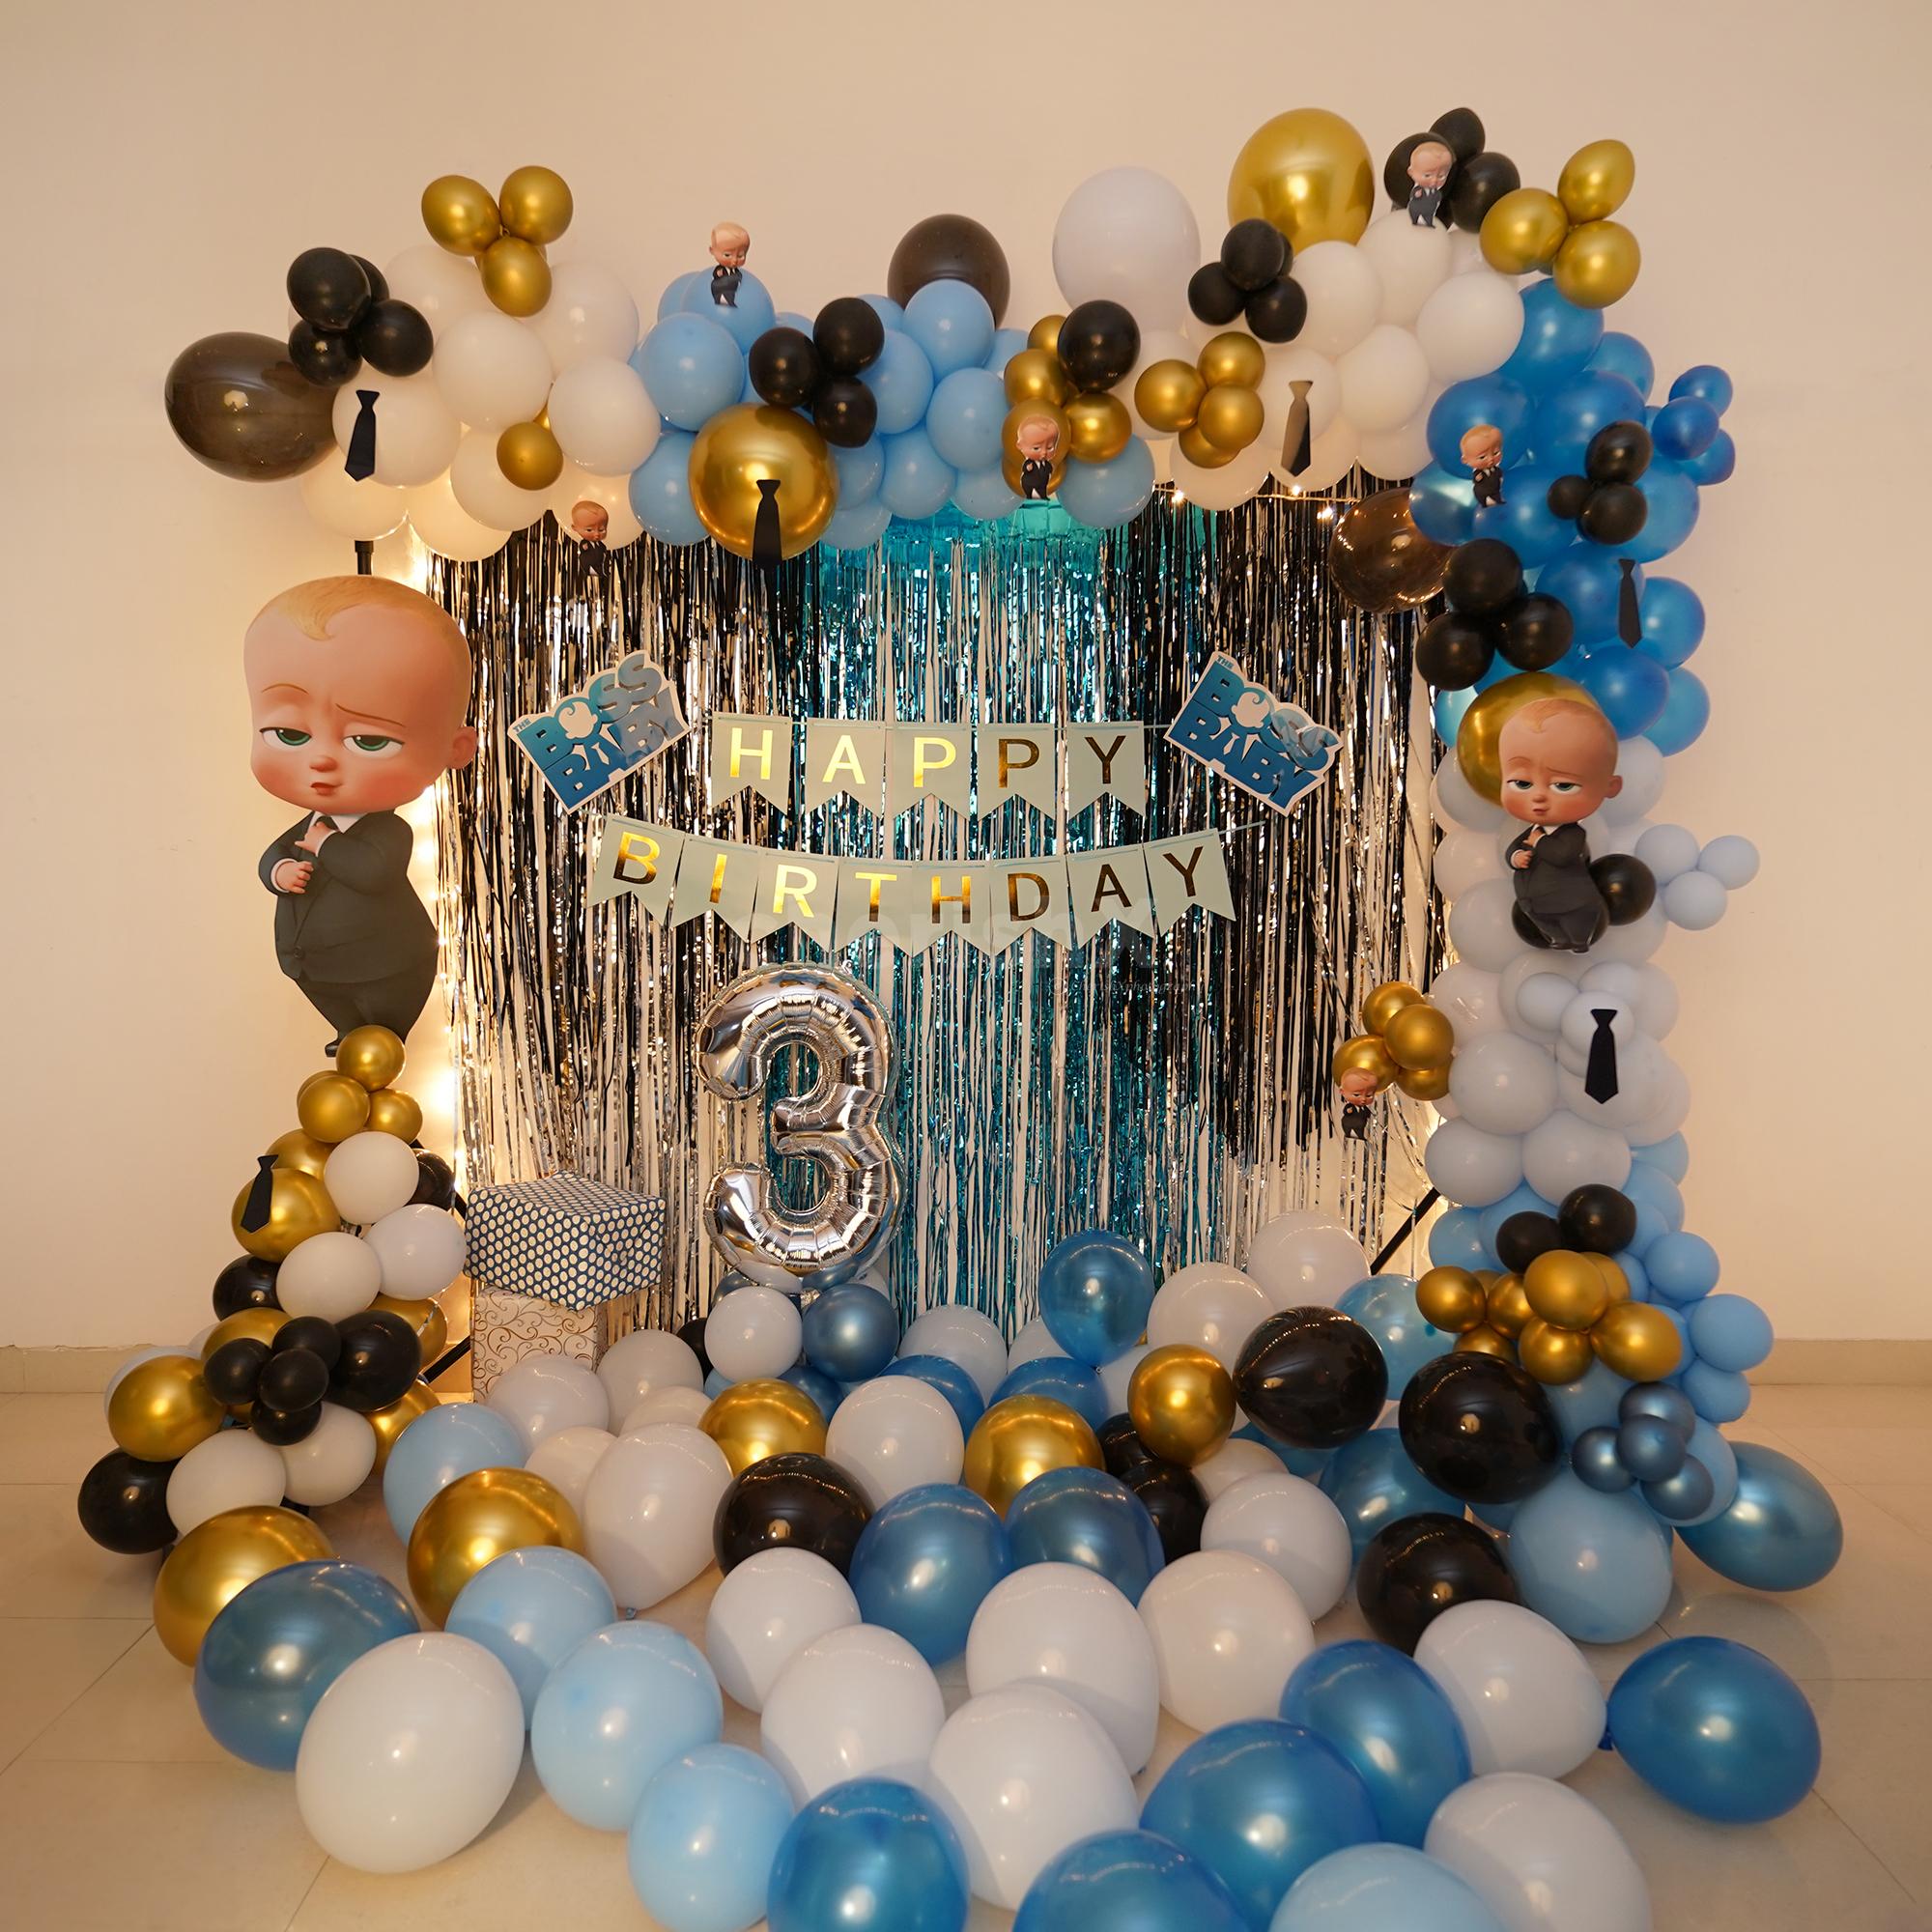 Boss Baby Theme Decor For Your Child'S Birthday. | Hyderabad